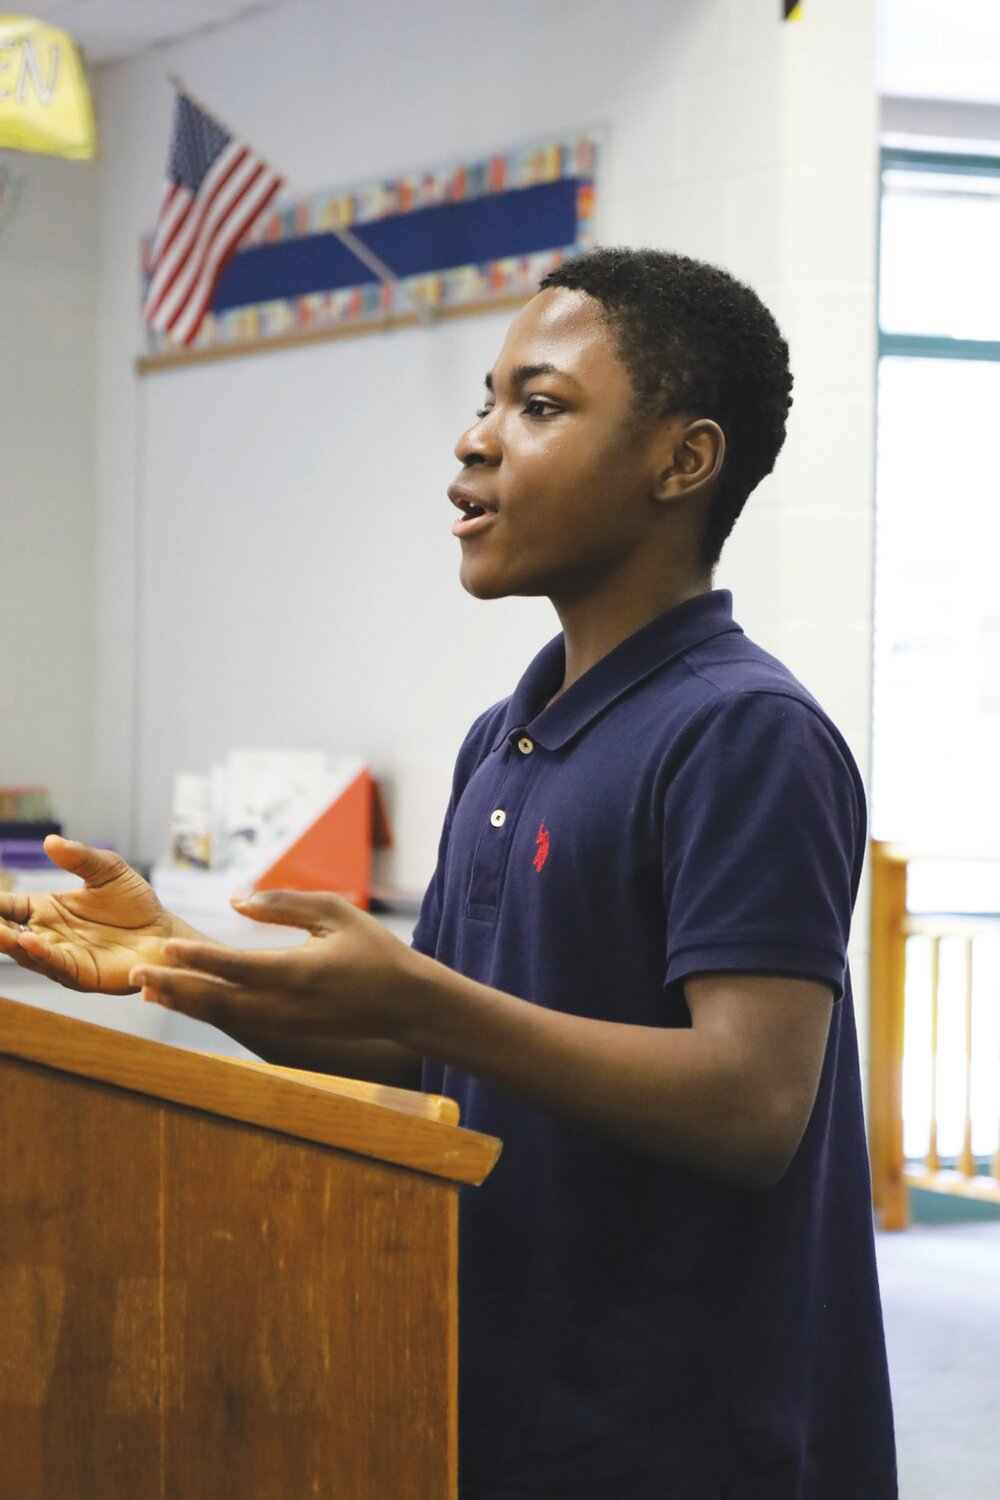 Miguel Degmore, Runner-Up, Osceola Middle School during Incubate Debate's tri-county tournament May 23.